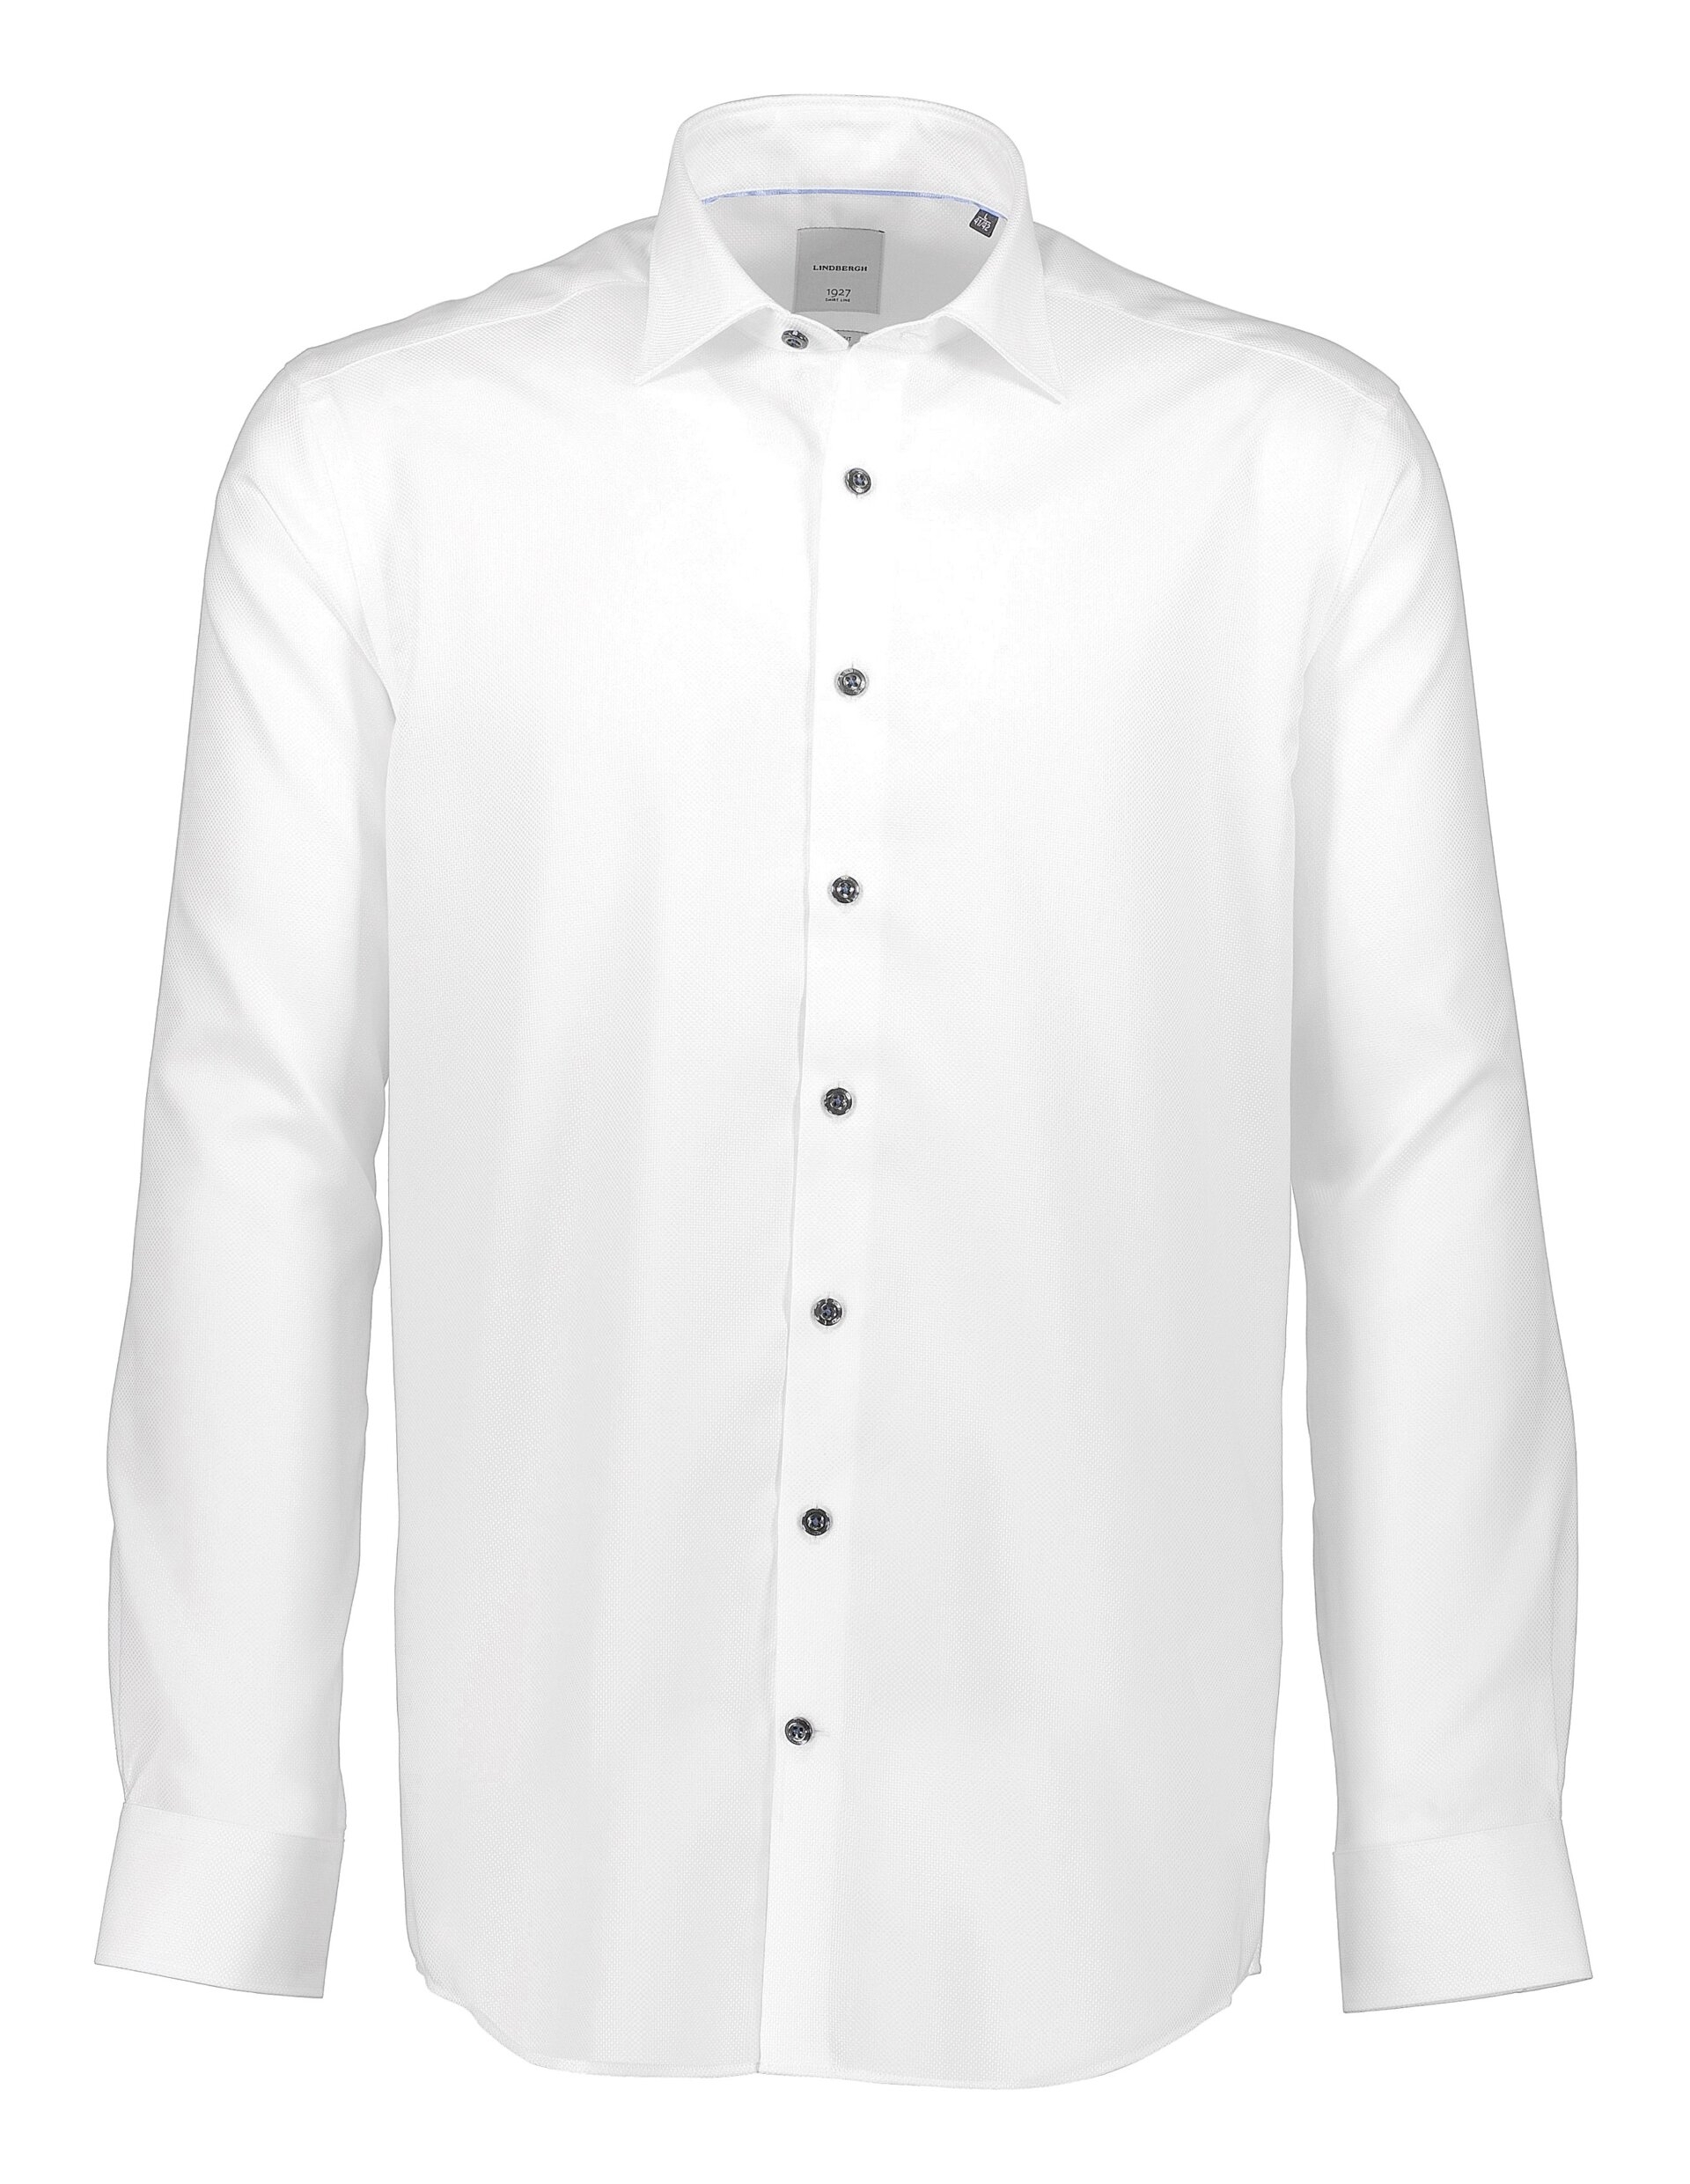 Lindbergh Business casual overhemd wit / white